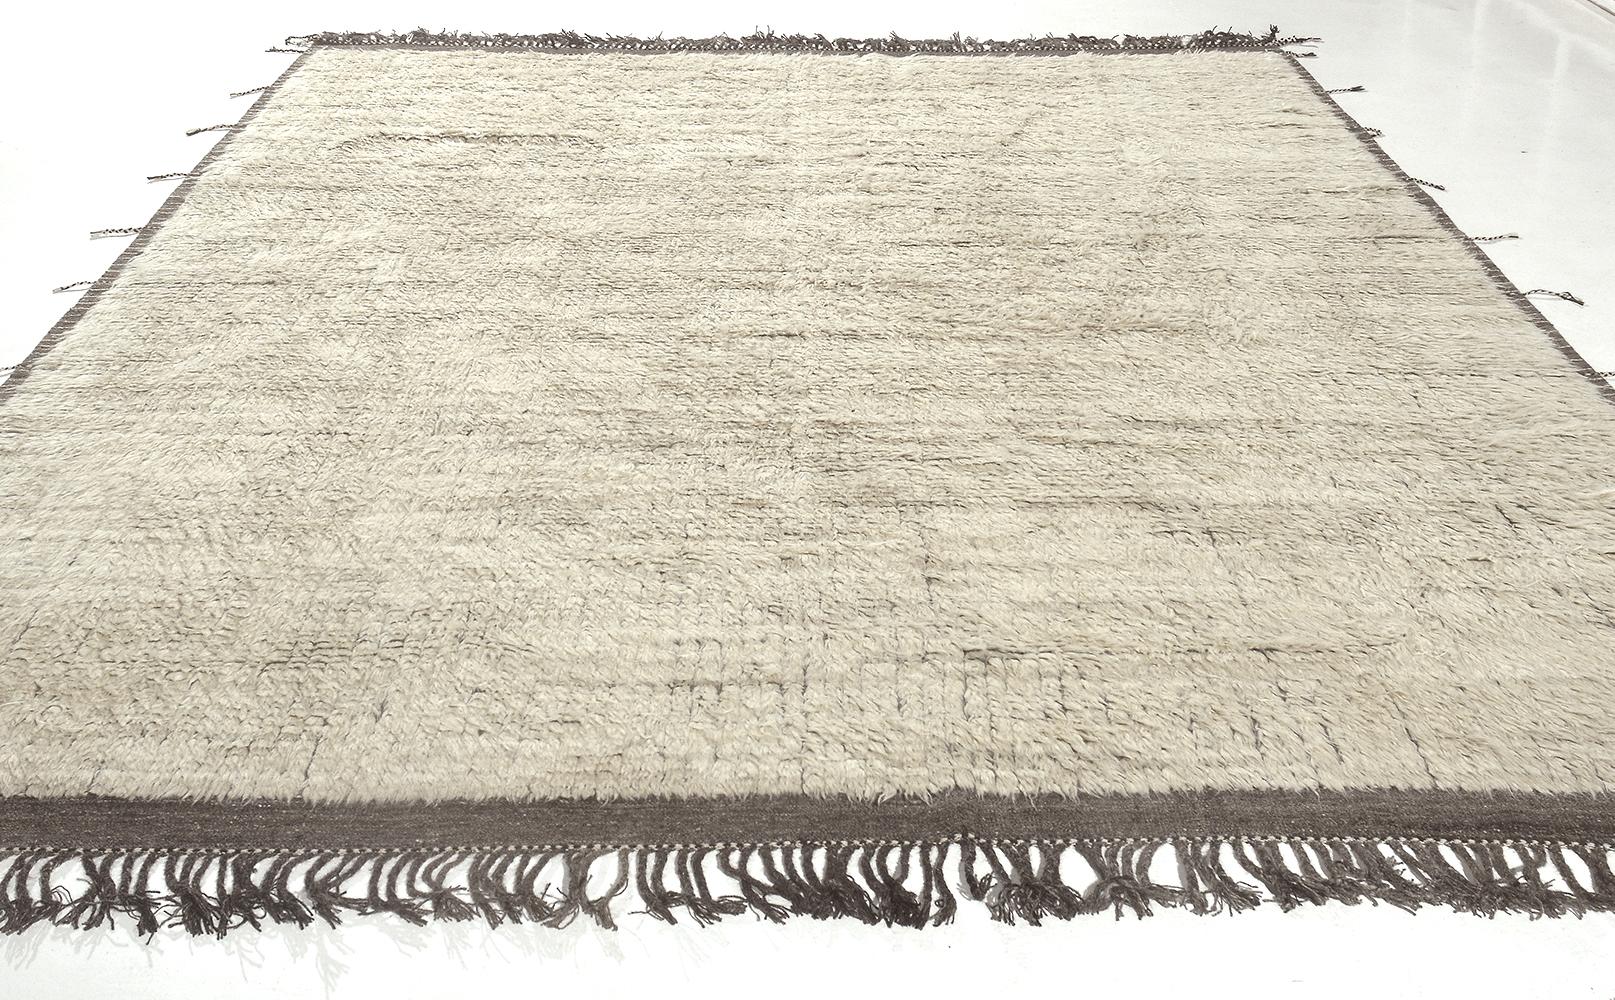 A beautiful and trendy modern Boho Chic rug, rug type / origin: Central Asian rug, date circa modern rug. Size: 9 ft 7 in x 11 ft 11 in (2.92 m x 3.63 m)

Some carpets add personality to the room by using a simple design approach. This carpet uses